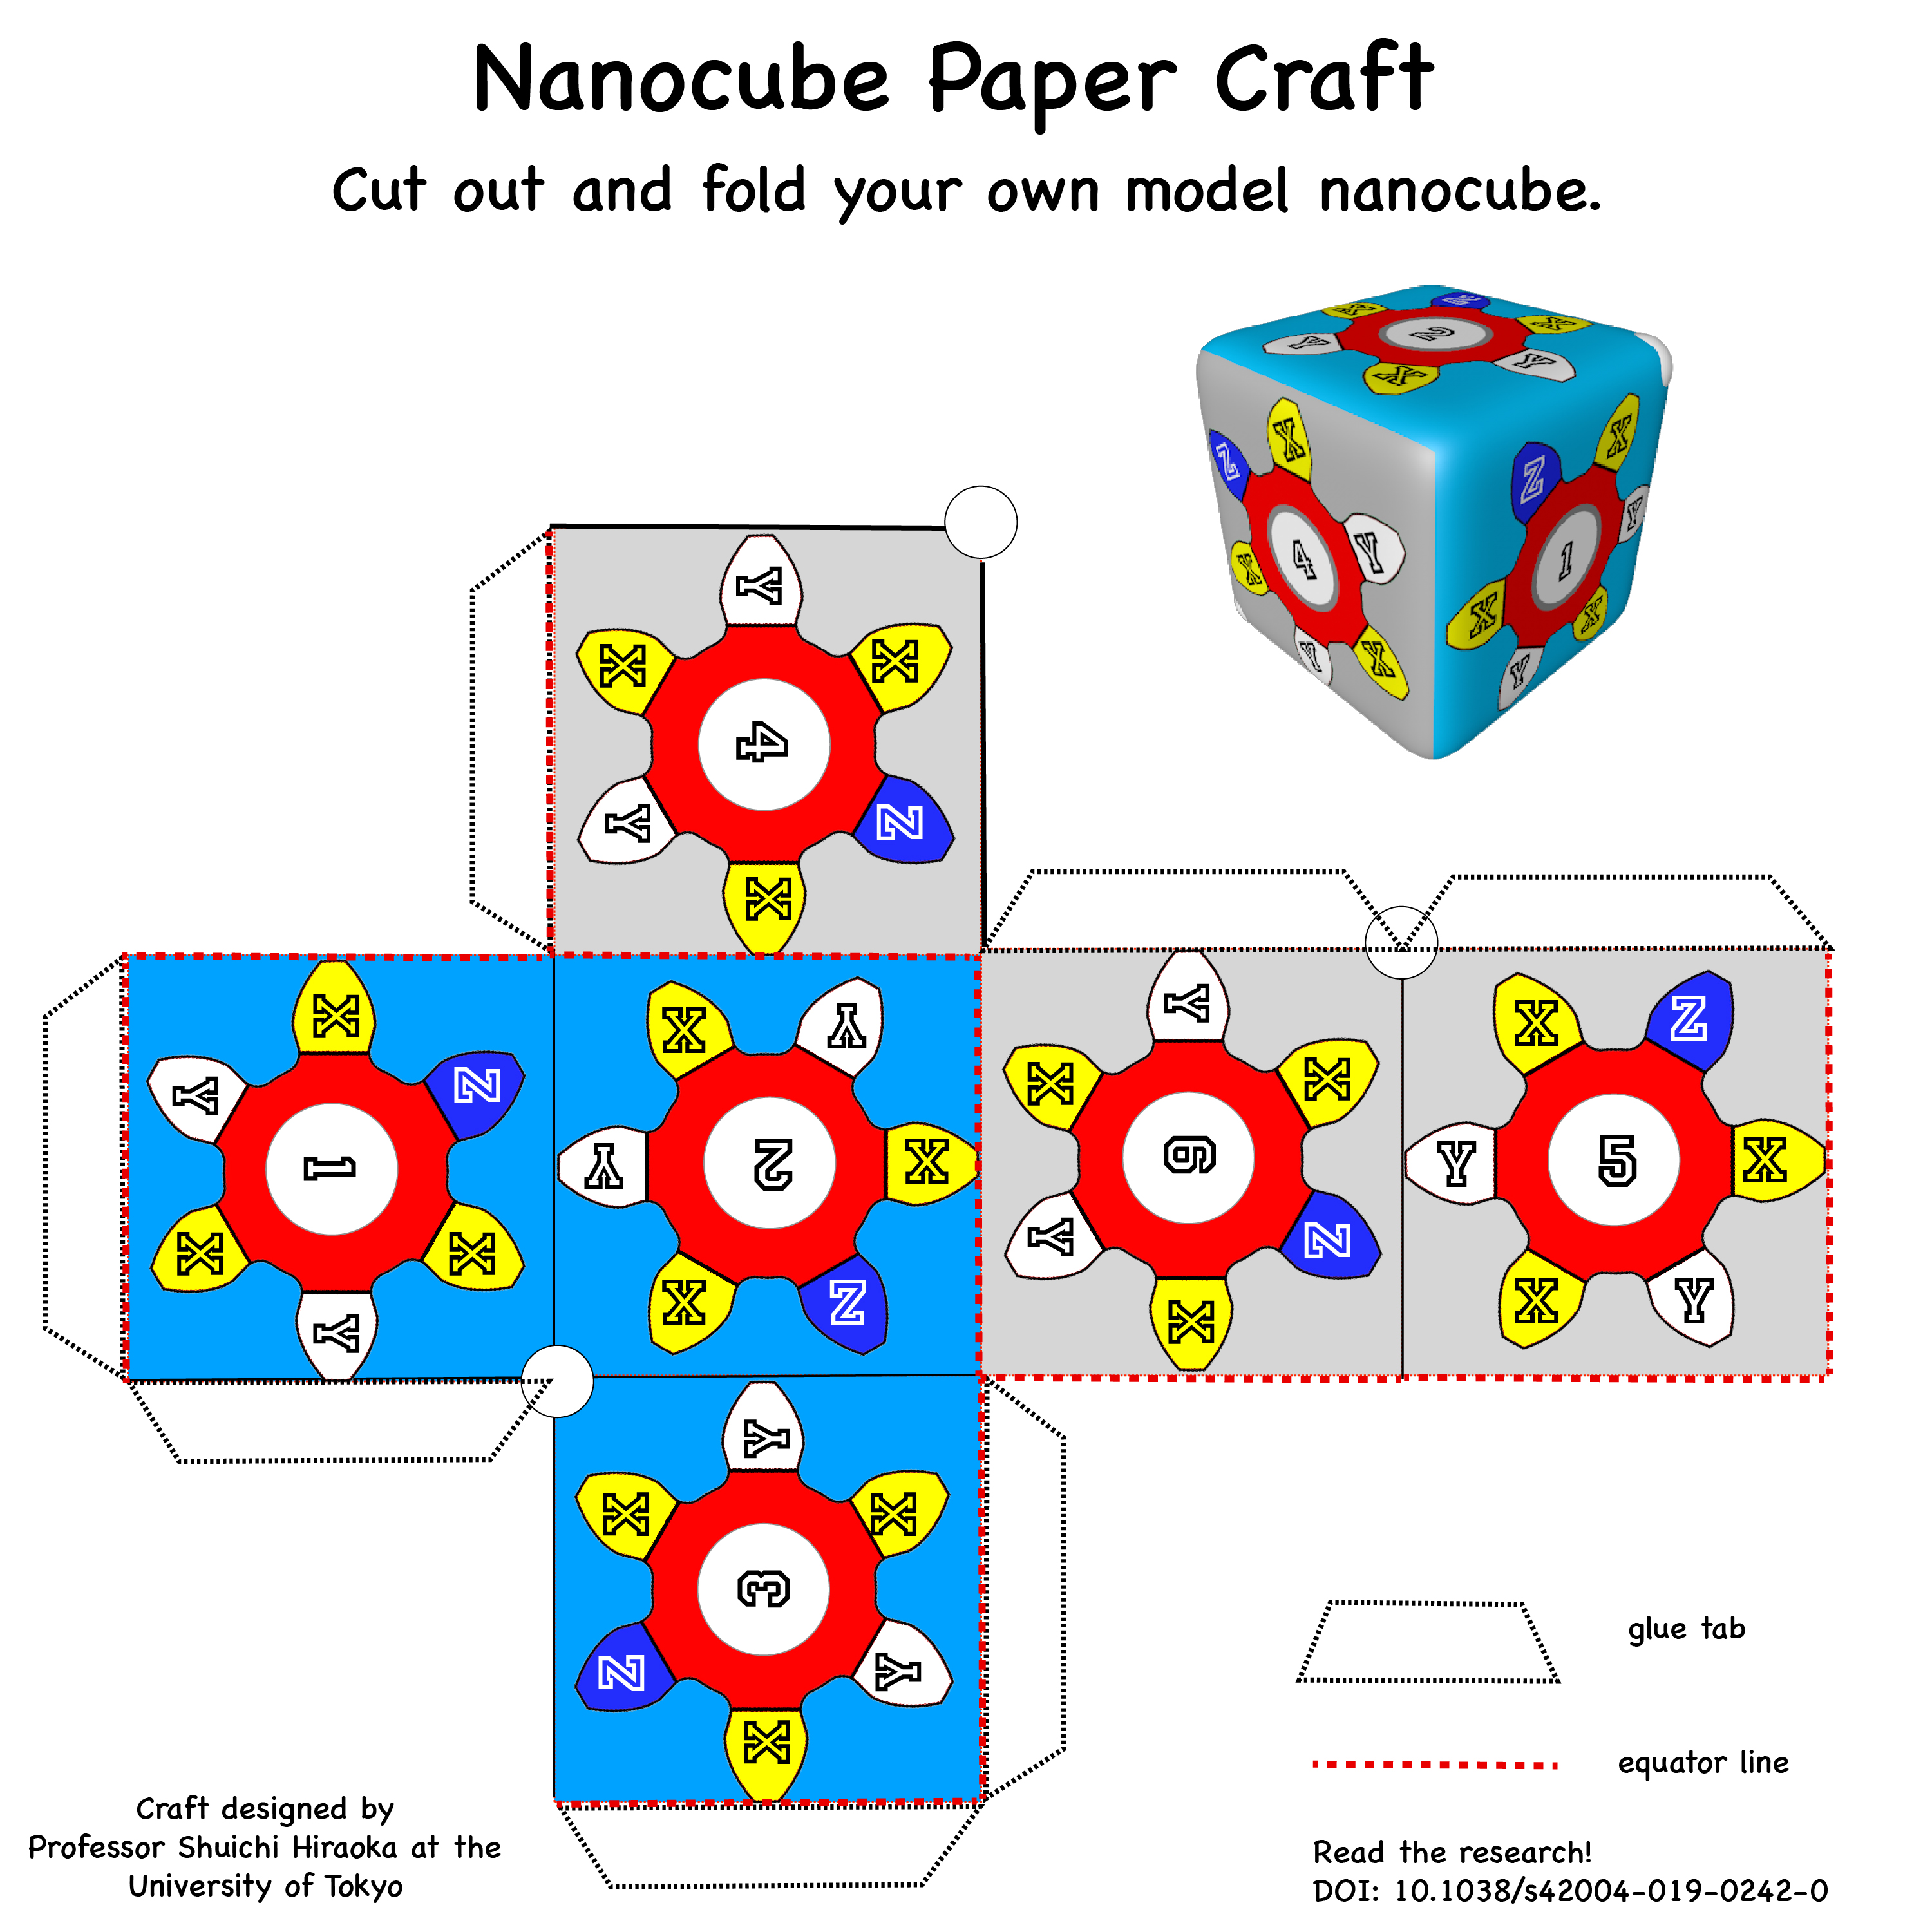 A pattern for a paper cube that represents the chemical structure of the nanocube used in the research.